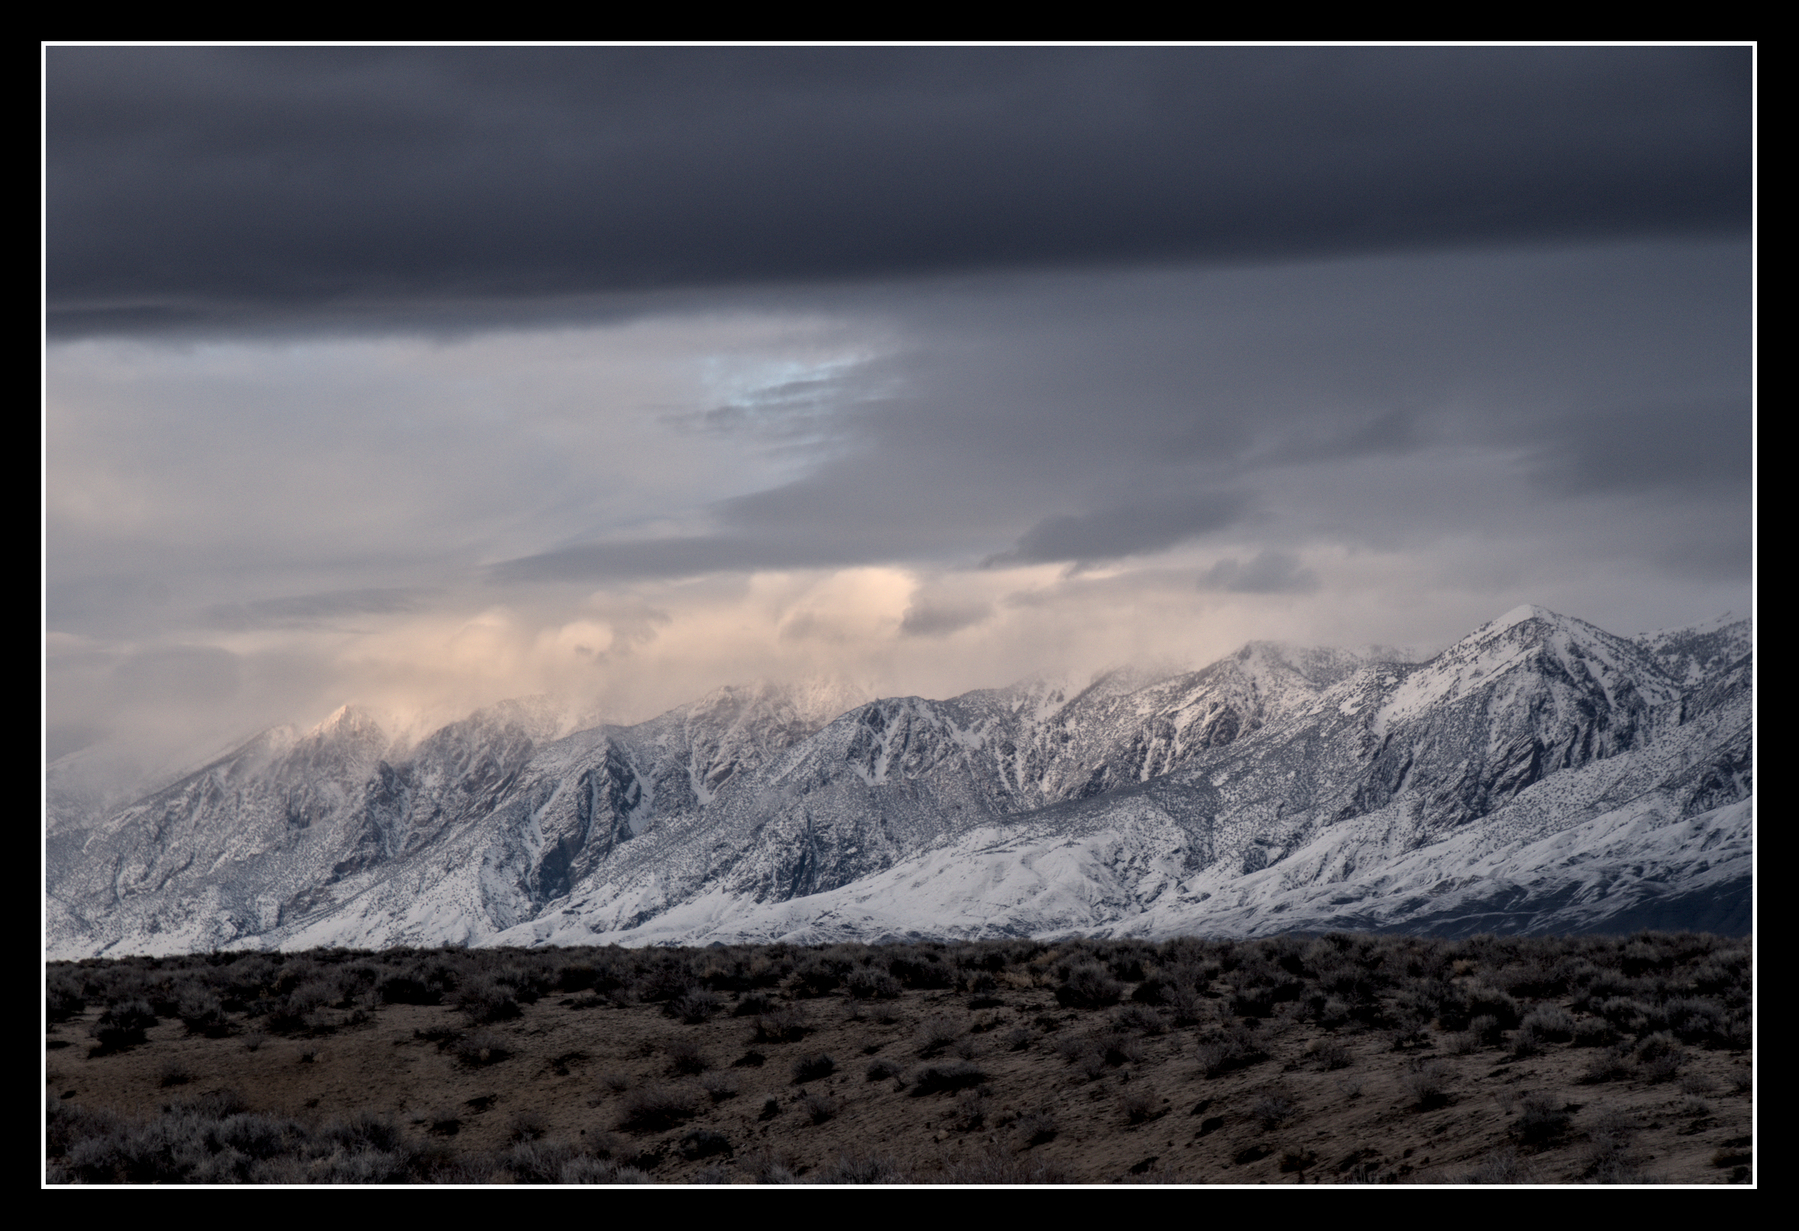 A wide, snow-covered mountain ridge is sandwiched between a dark layer of clouds above and high desert scrub below.